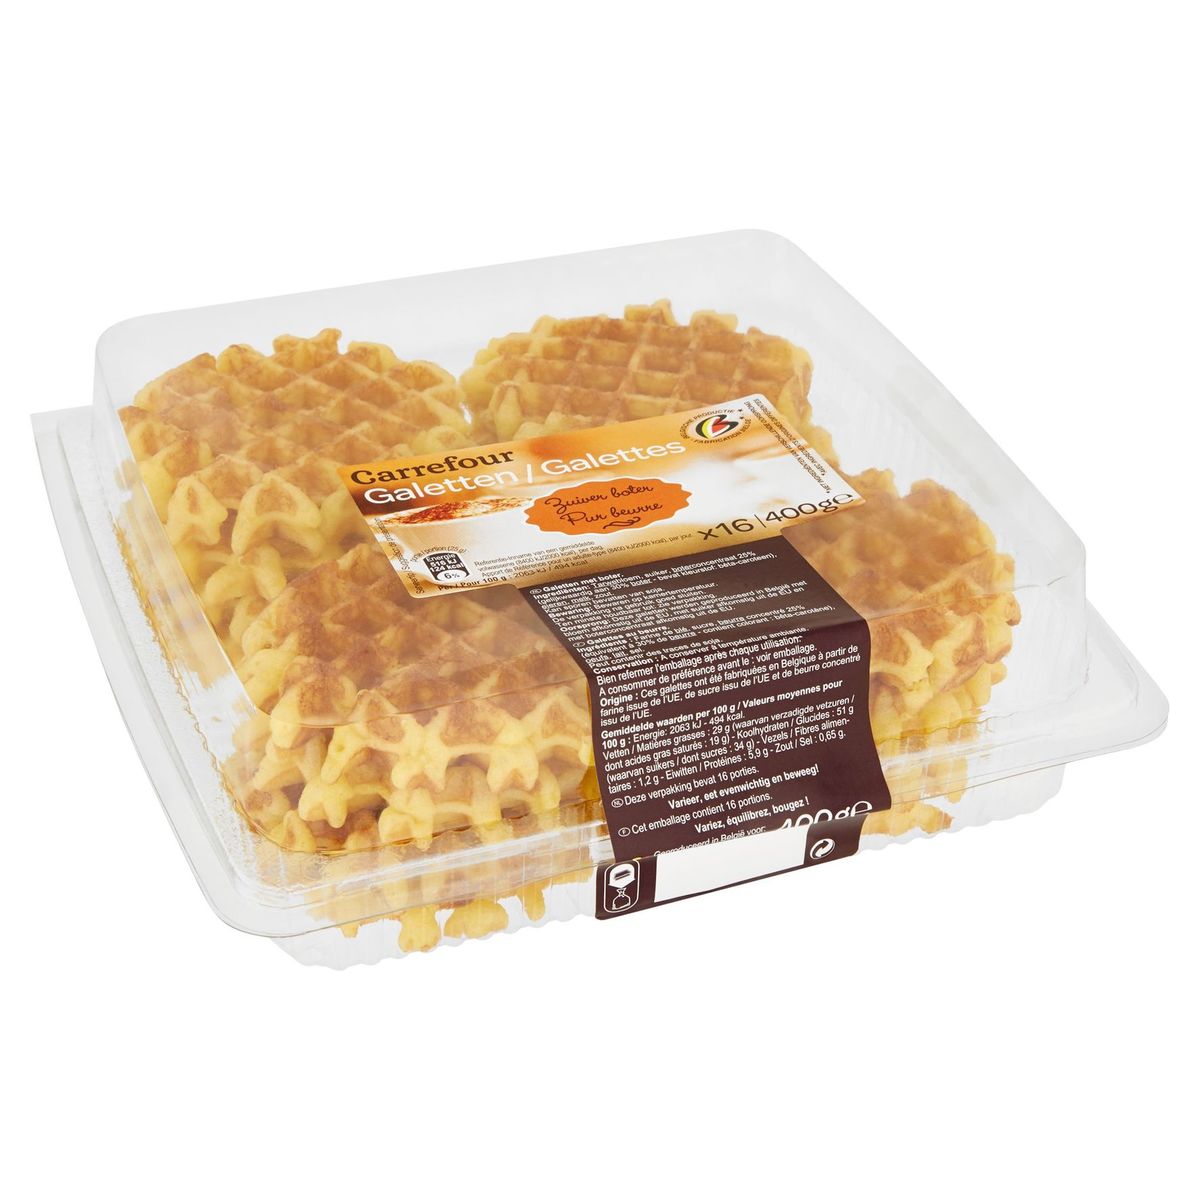 Carrefour 16 Galettes Pur Beurre 400 g